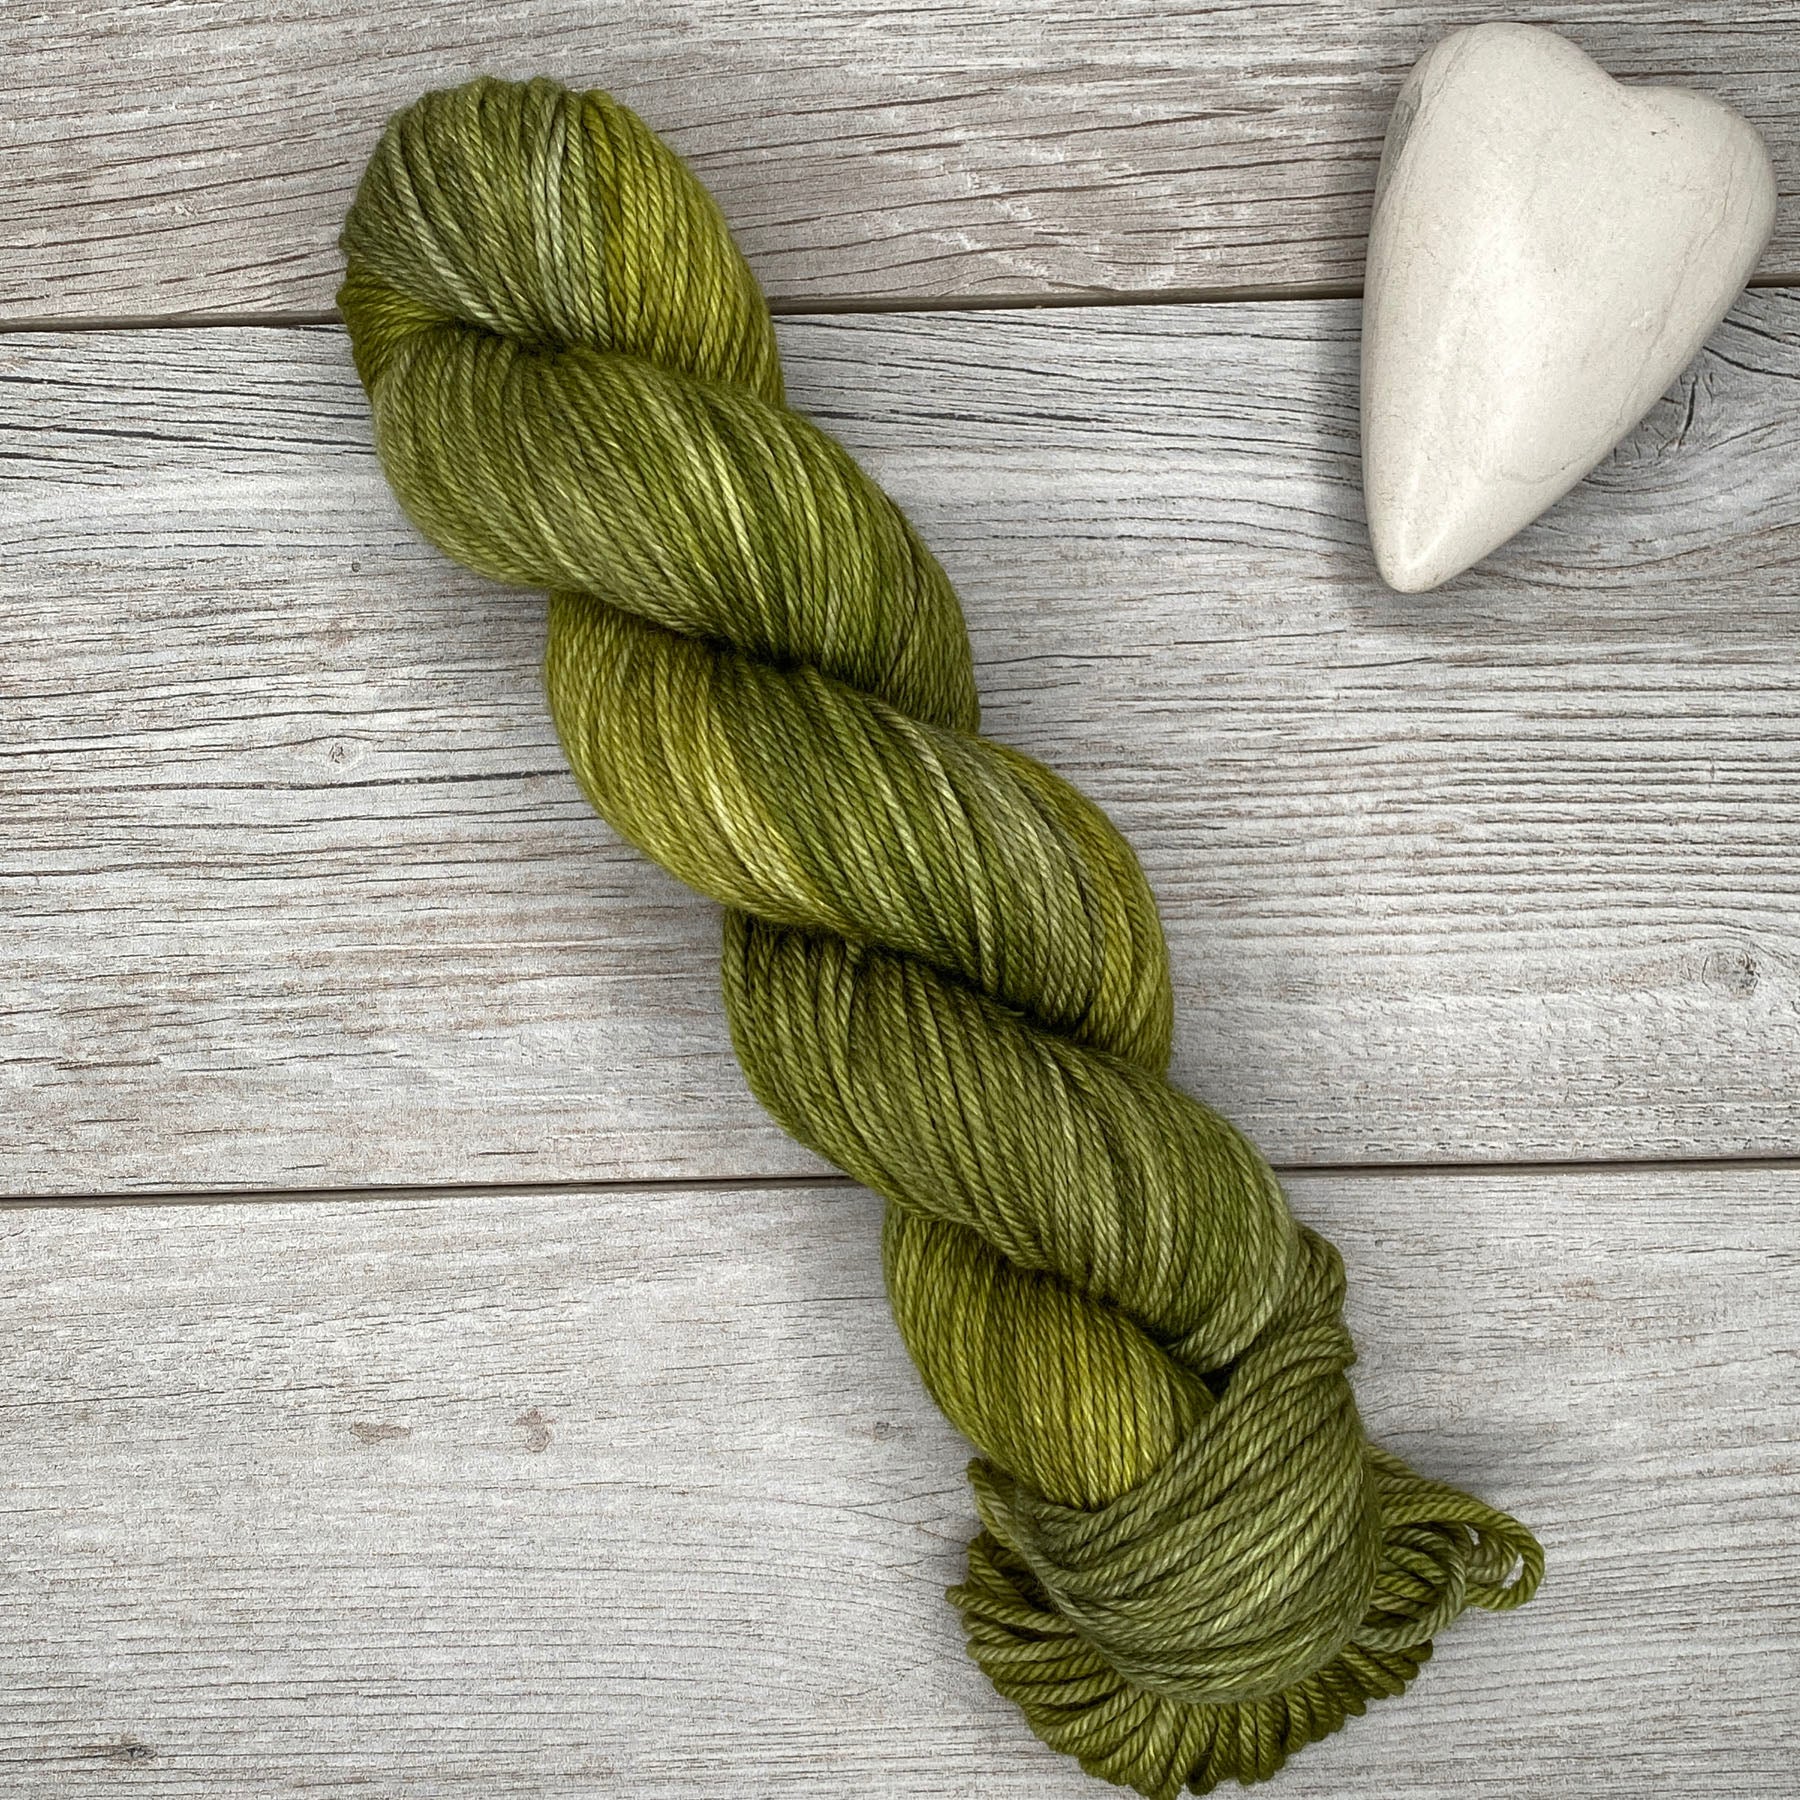 There Is More In You Of Good Than You Know  |  Hobbit &amp; Tolkien Inspired  |  RAMbunctious  |  worsted weight